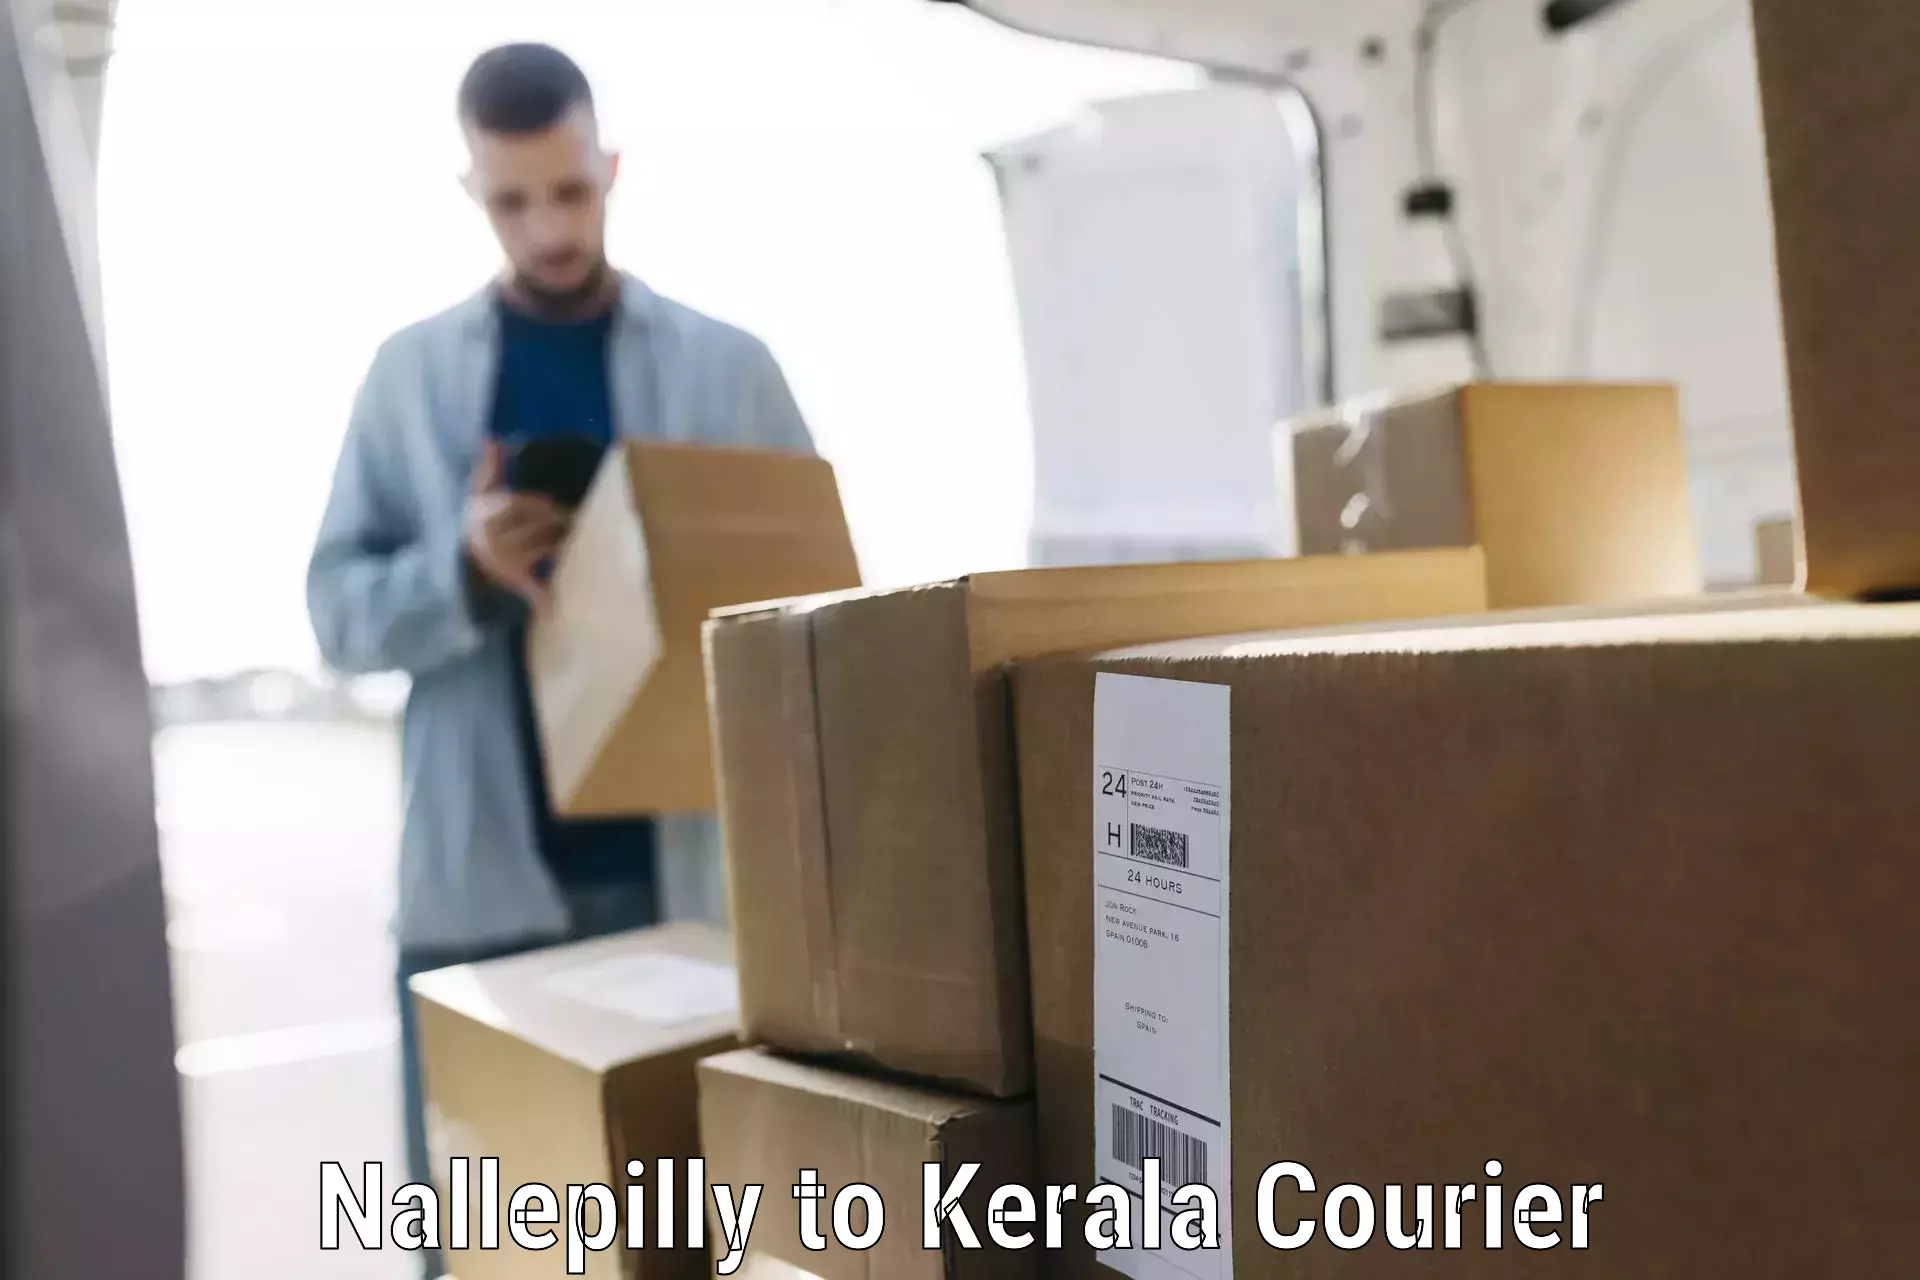 Baggage relocation service Nallepilly to Kerala